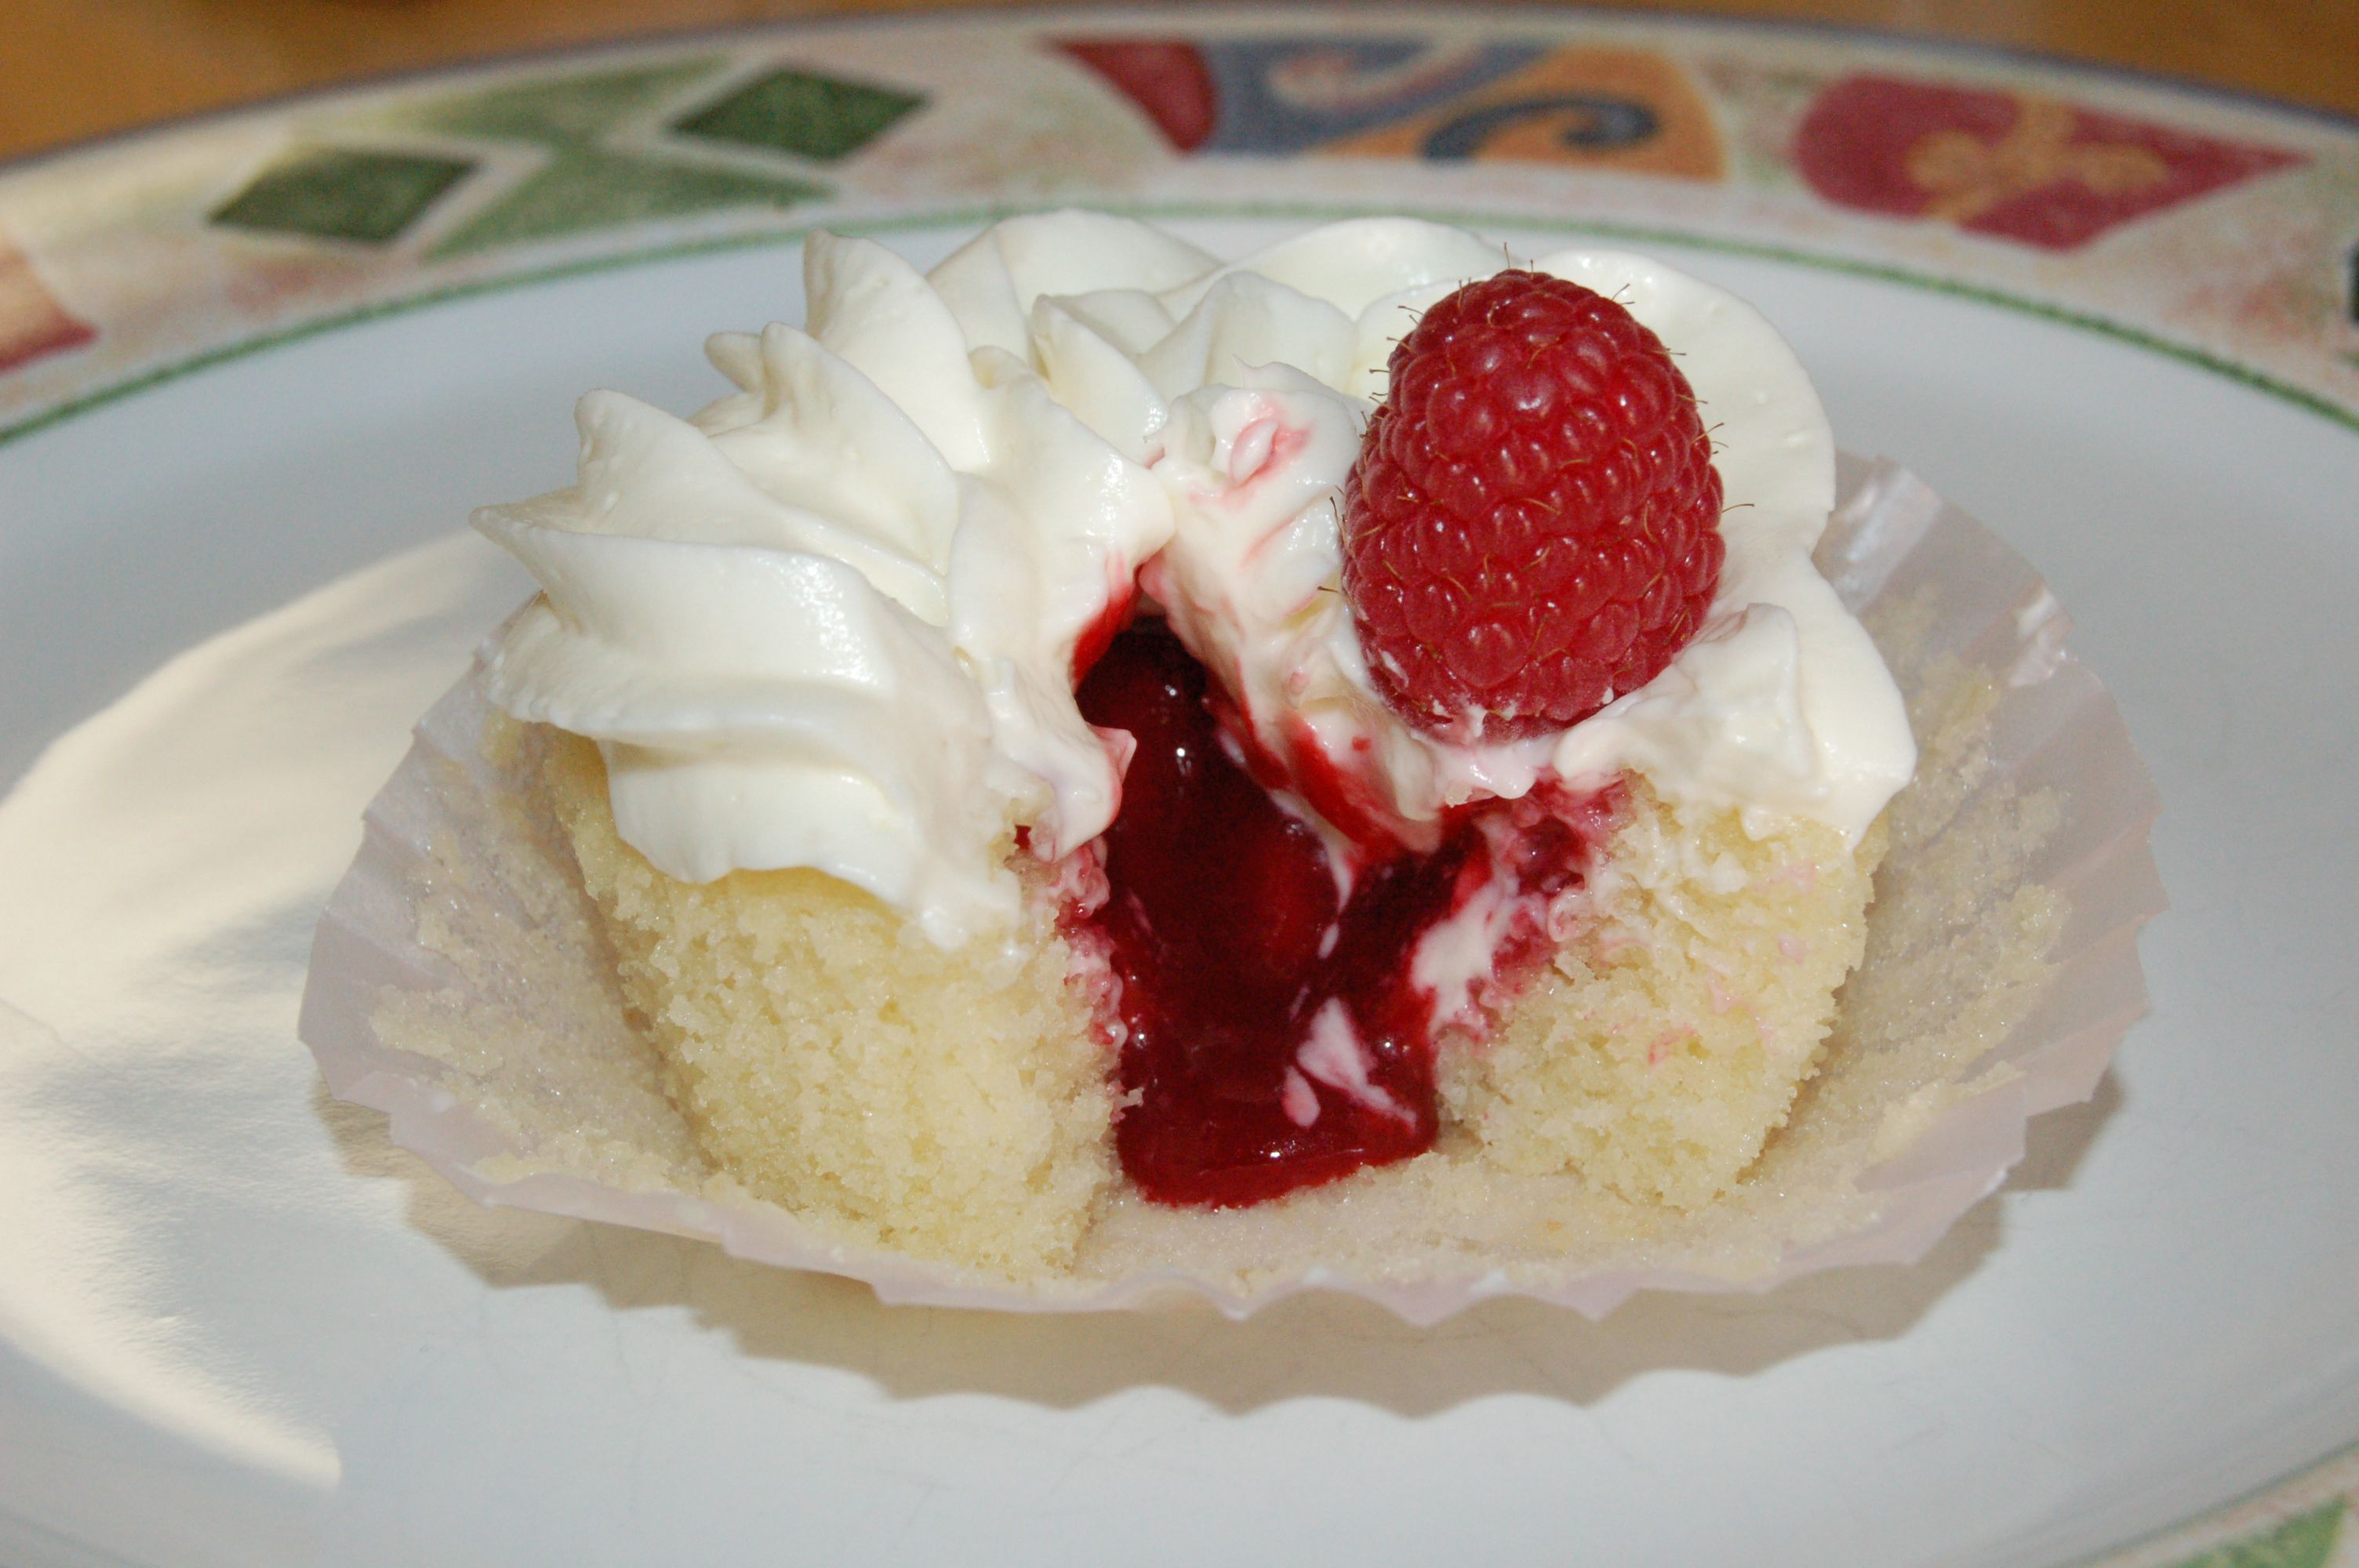 White Chocolate Raspberry Cupcakes with Filling